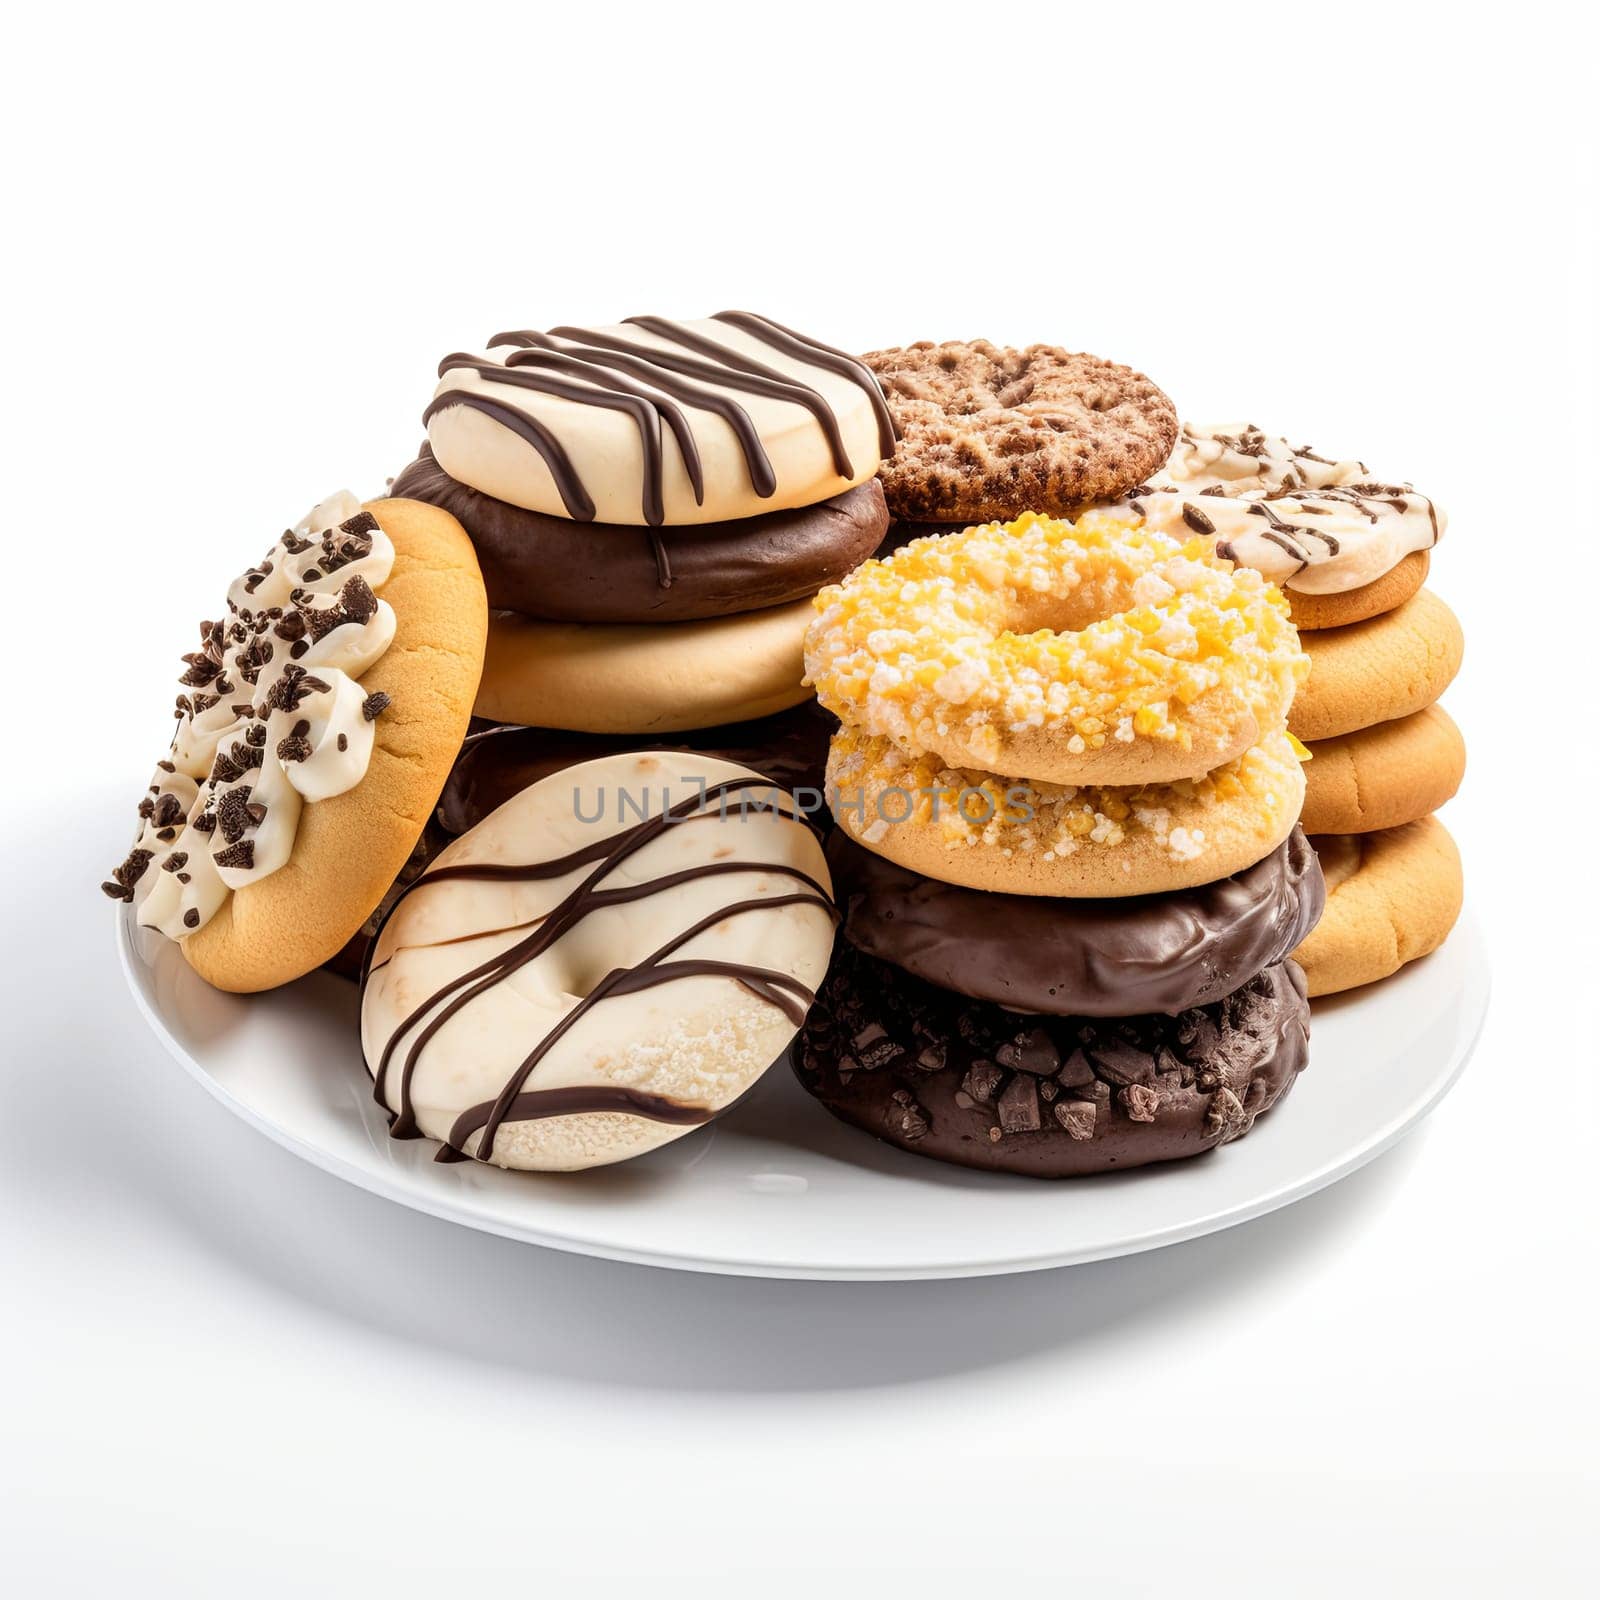 Biscuit Cookies Assortment on a Plate. Cookies on White Background.